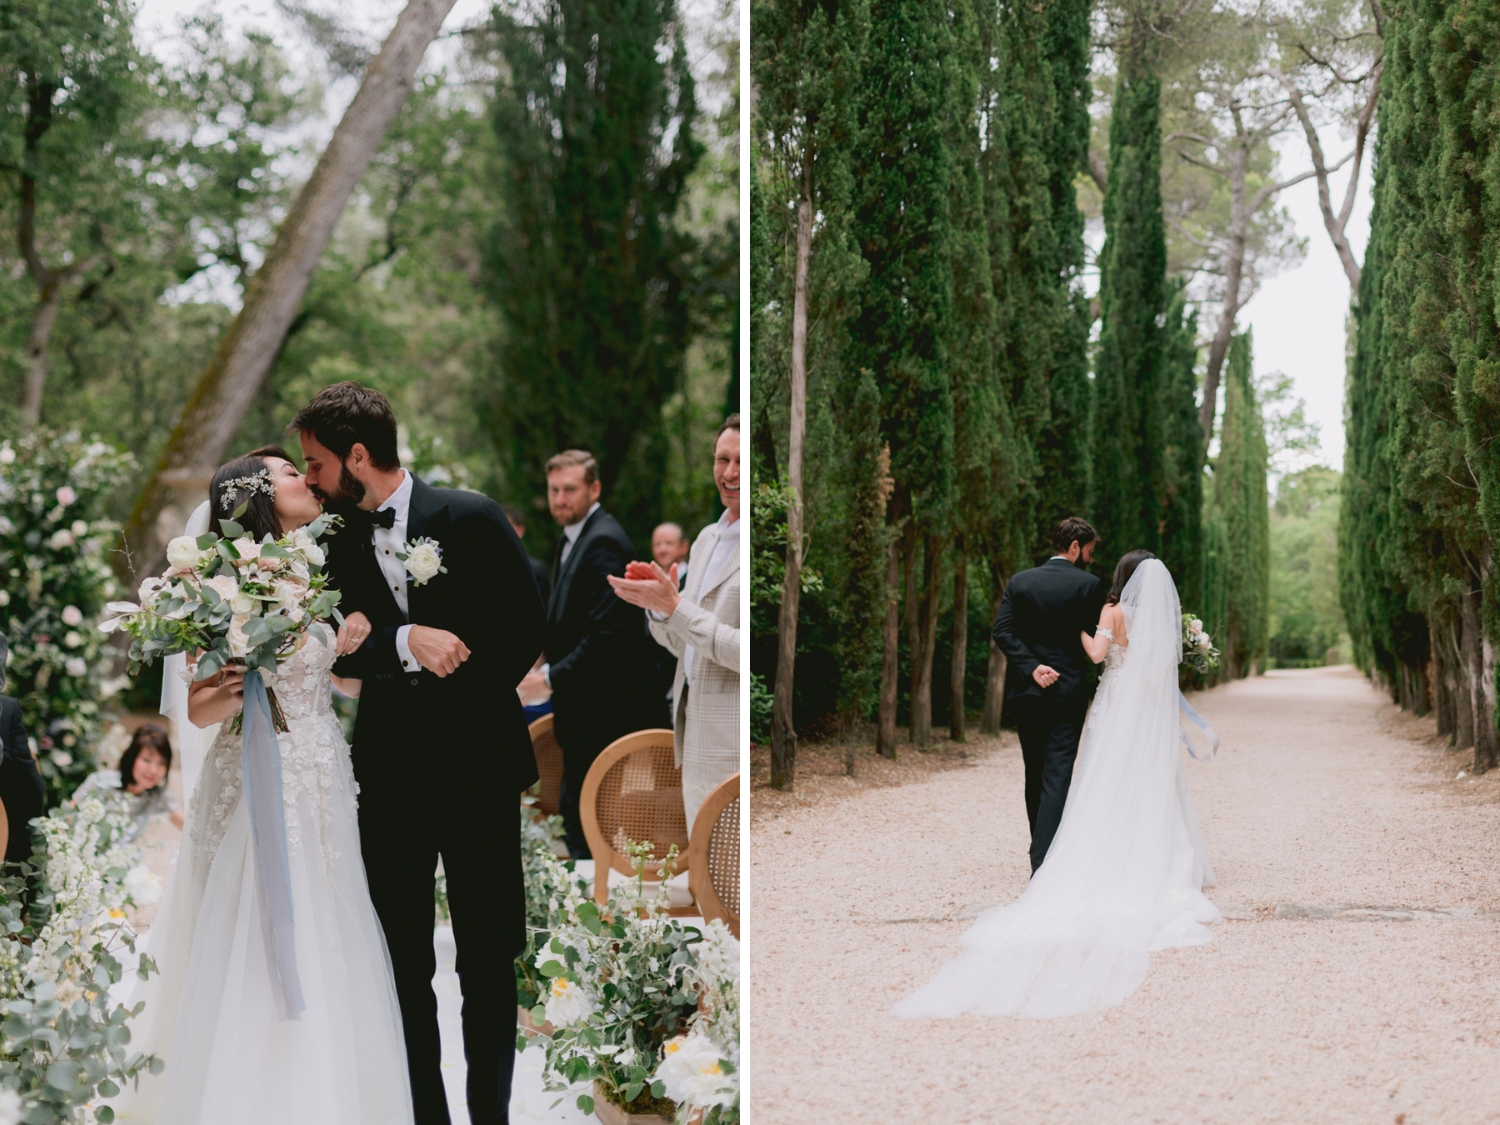 Ceremony at a Spring Wedding at Chateau Martinay in Provence, France